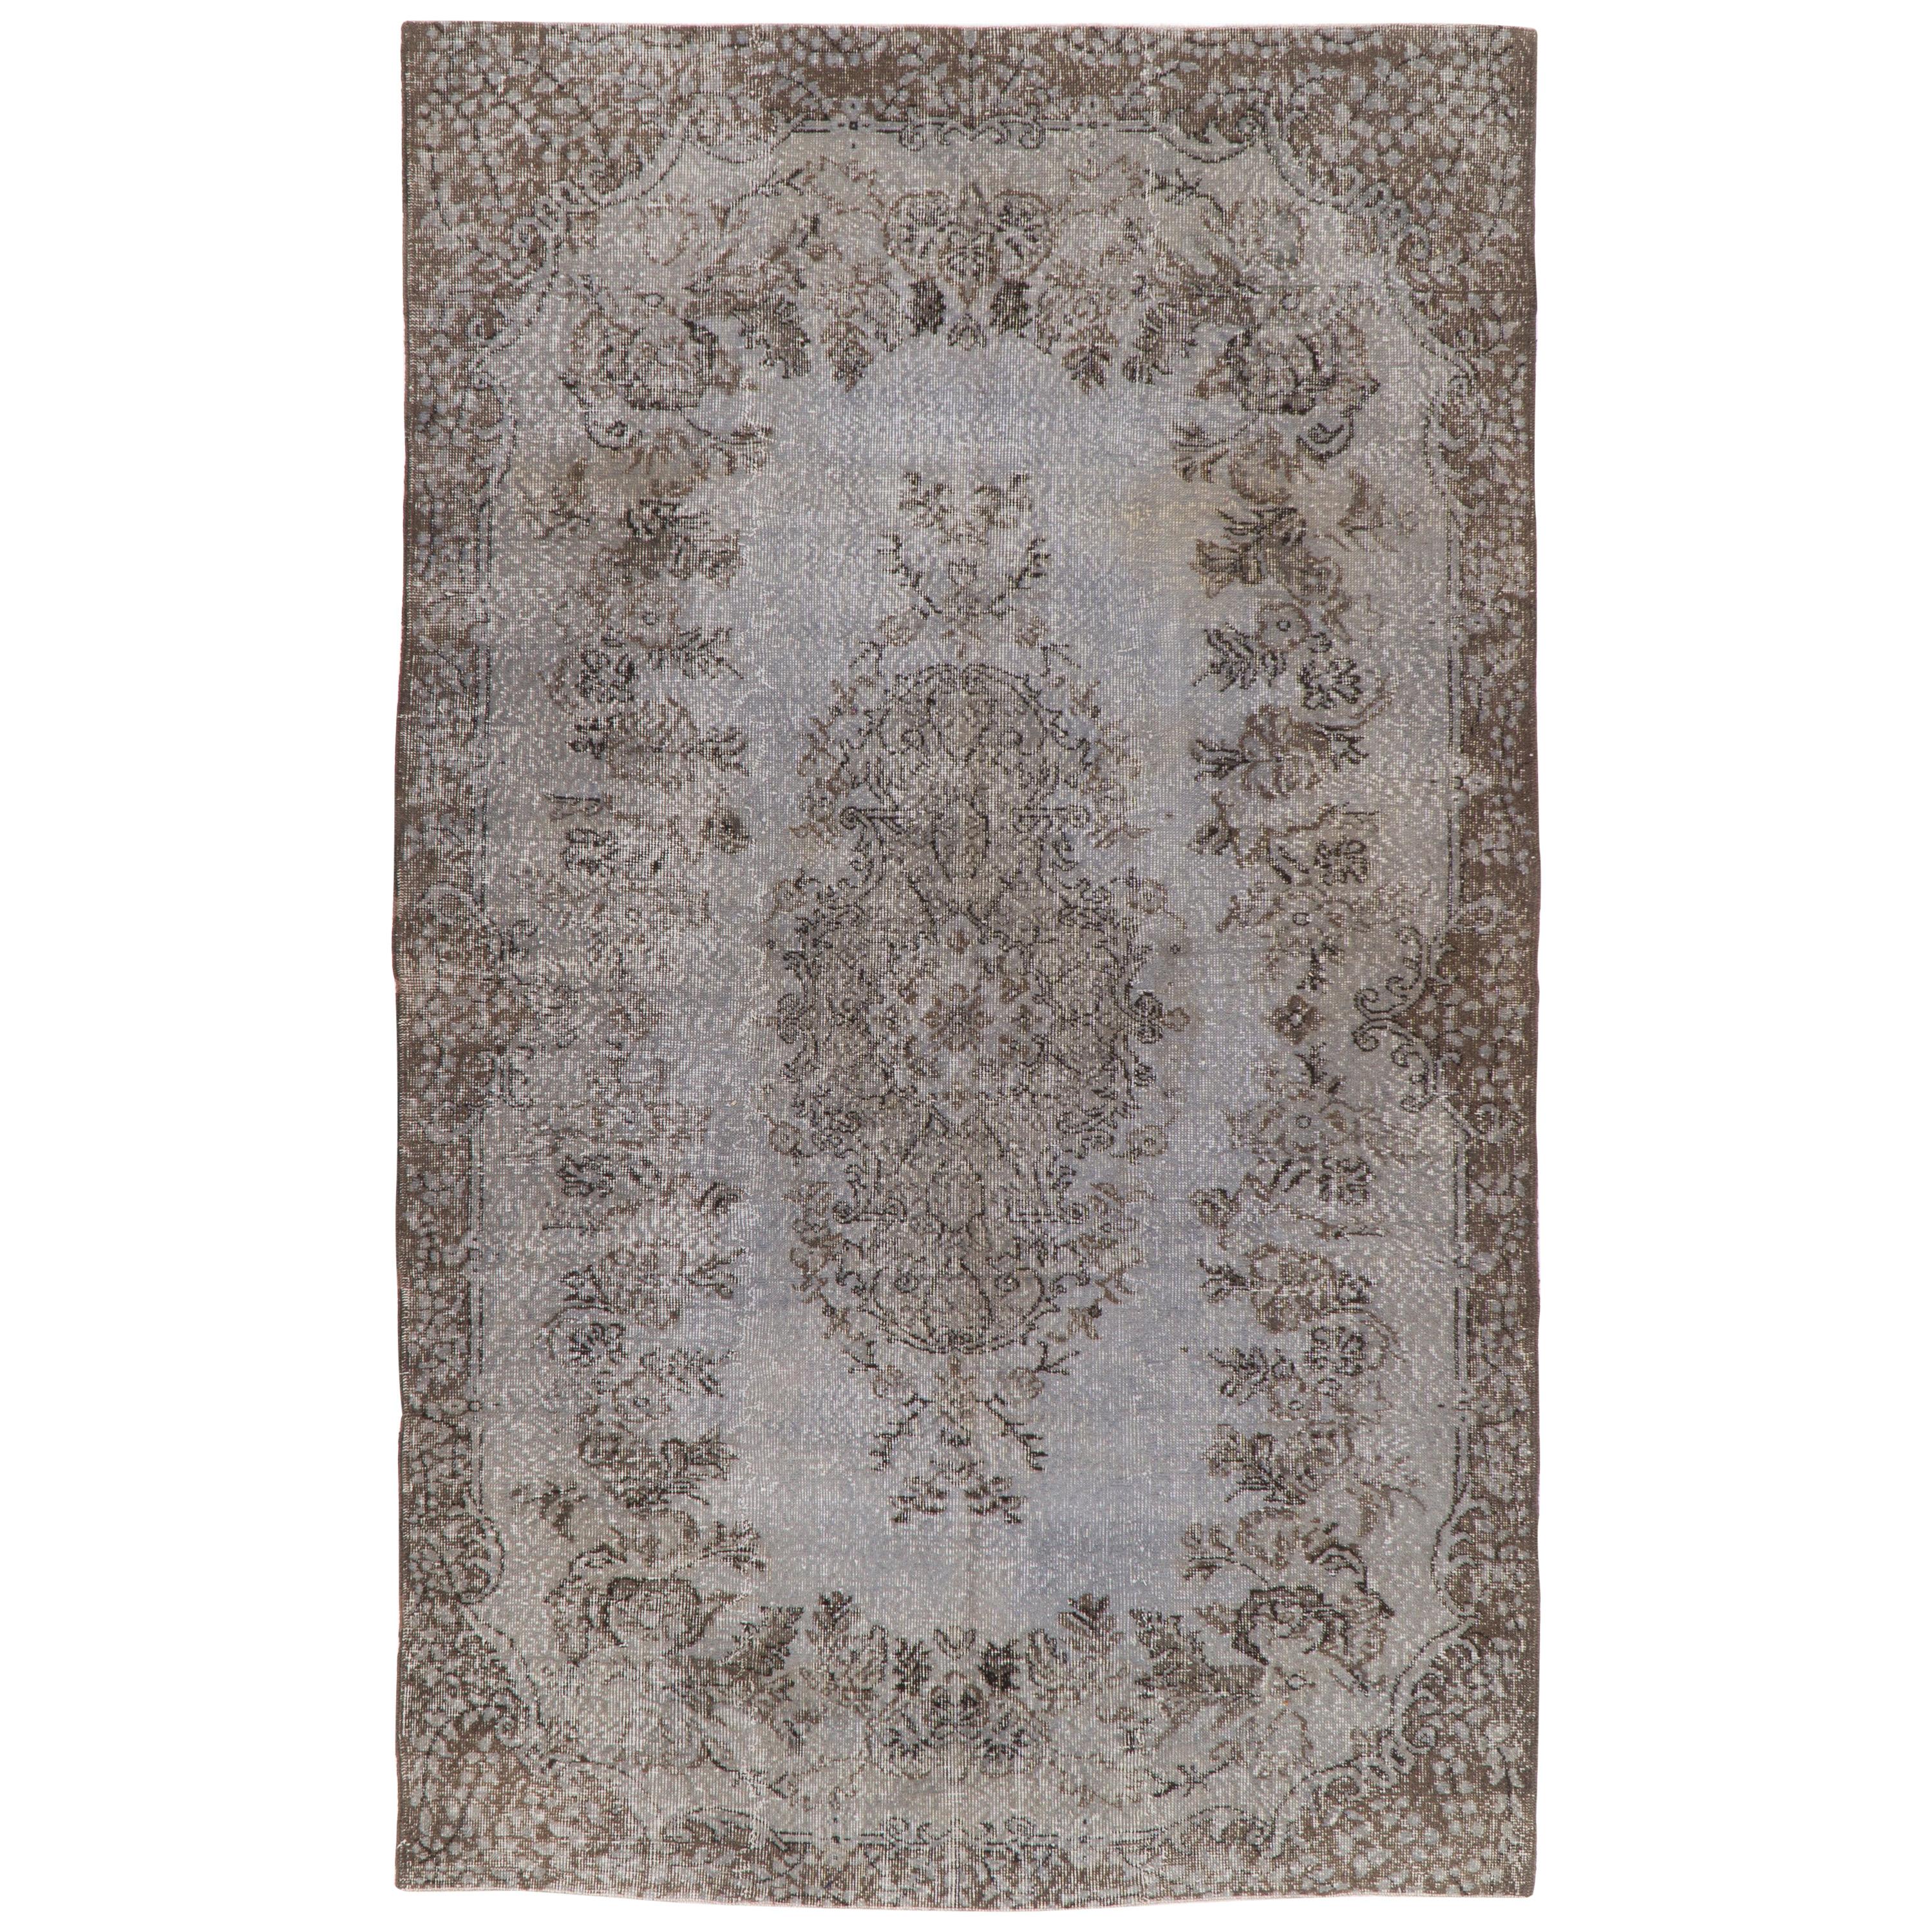 6x10 Ft Vintage Handmade Anatolian Area Rug Re-Dyed in Gray Color For Sale